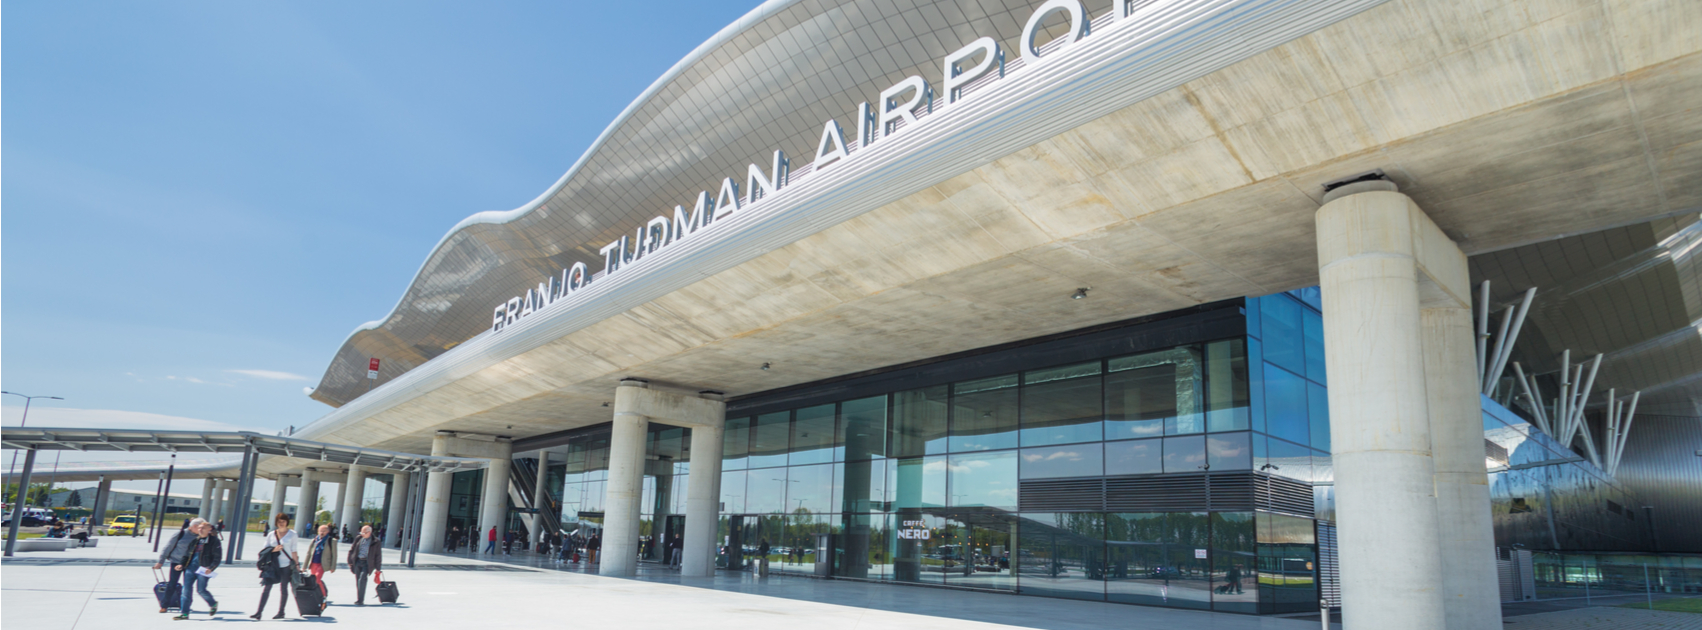 Zagreb Airport targets 5% growth in 2019